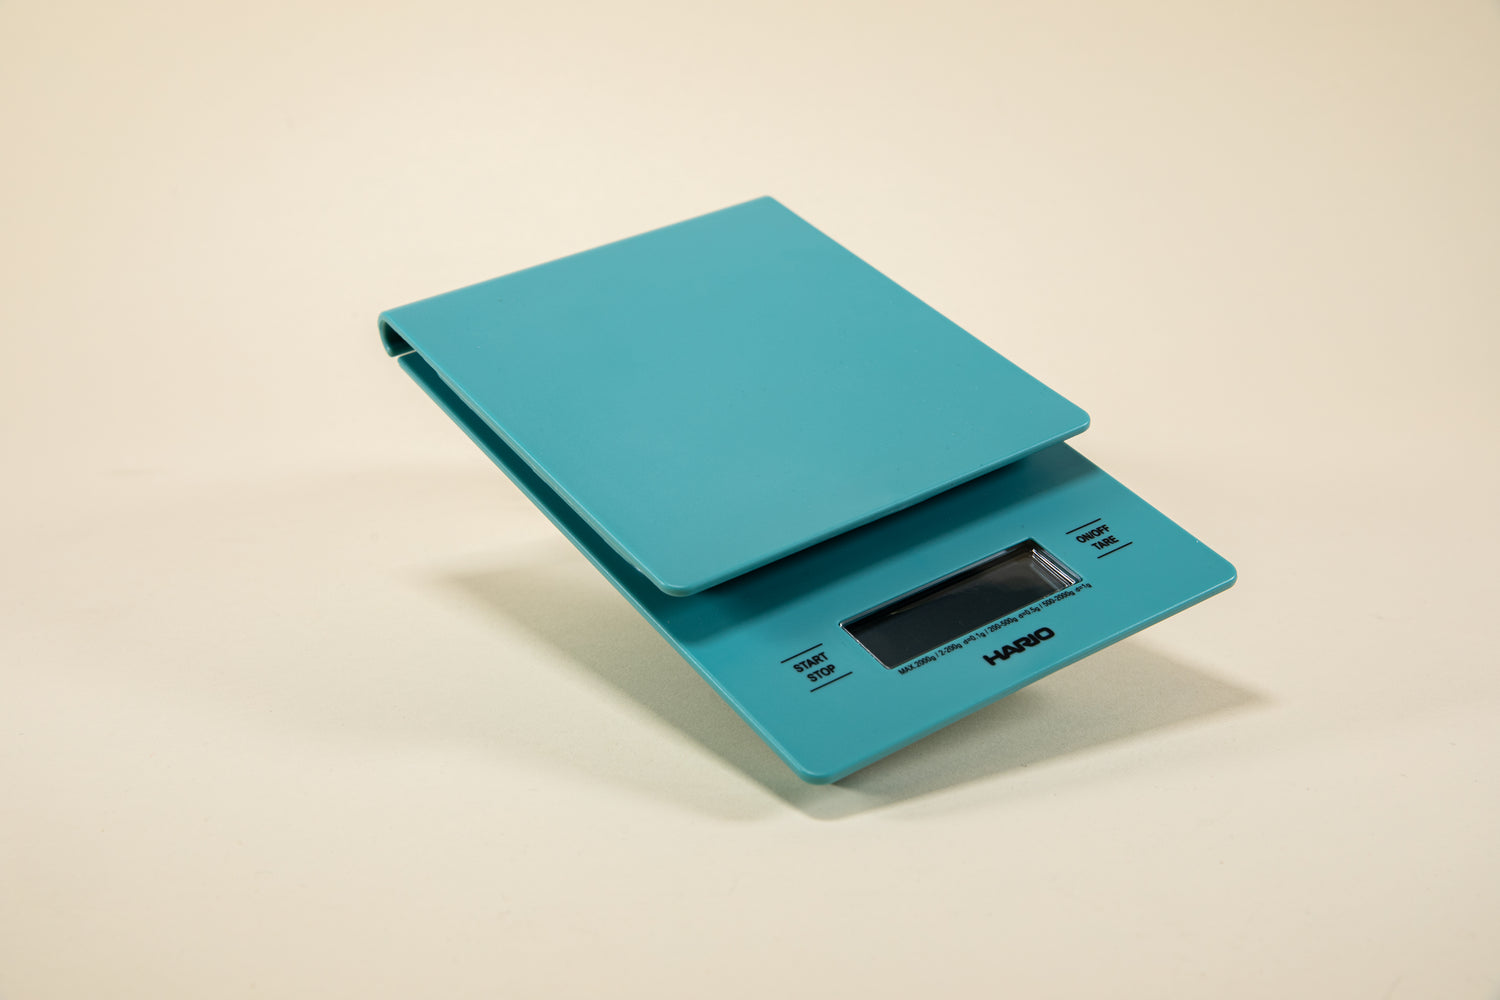 Turquoise plastic rectangular shaped scale with digital screen and set against a light background.